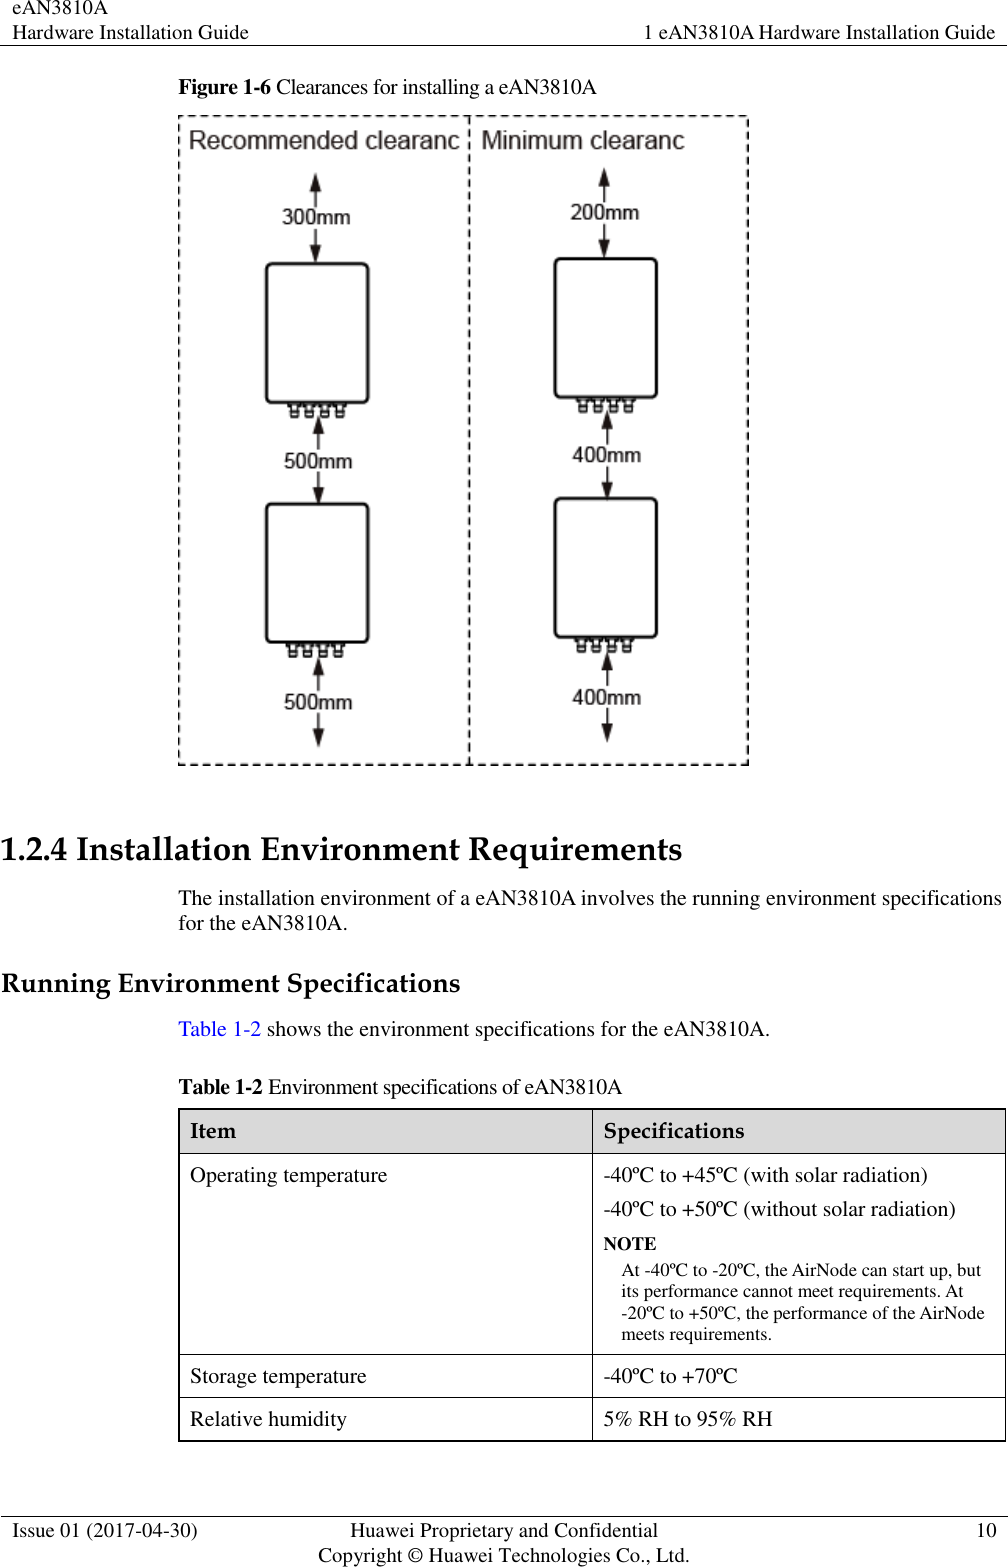 eAN3810A   Hardware Installation Guide 1 eAN3810A Hardware Installation Guide  Issue 01 (2017-04-30) Huawei Proprietary and Confidential                                     Copyright © Huawei Technologies Co., Ltd. 10  Figure 1-6 Clearances for installing a eAN3810A   1.2.4 Installation Environment Requirements The installation environment of a eAN3810A involves the running environment specifications for the eAN3810A. Running Environment Specifications Table 1-2 shows the environment specifications for the eAN3810A. Table 1-2 Environment specifications of eAN3810A Item Specifications Operating temperature -40ºC to +45ºC (with solar radiation) -40ºC to +50ºC (without solar radiation) NOTE At -40ºC to -20ºC, the AirNode can start up, but its performance cannot meet requirements. At -20ºC to +50ºC, the performance of the AirNode meets requirements. Storage temperature -40ºC to +70ºC Relative humidity 5% RH to 95% RH 